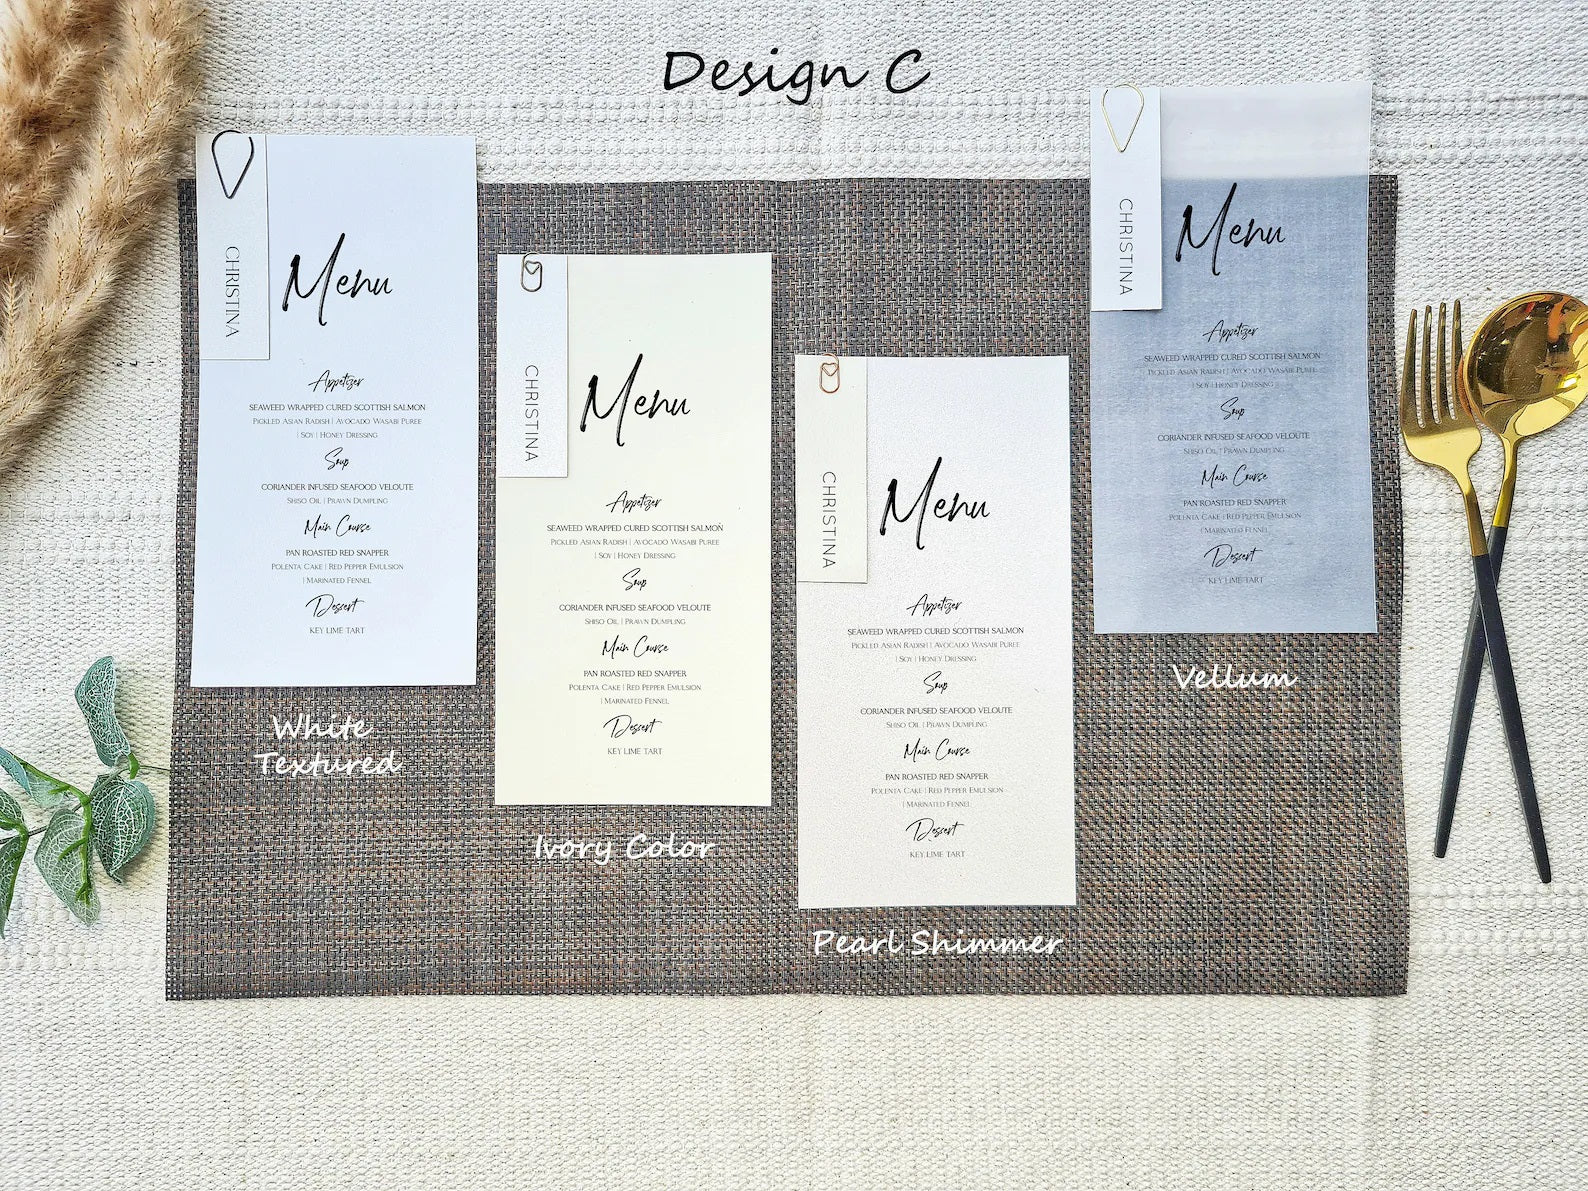 White Textured, Ivory, Pearl Shimmer or Vellum Menu Card Designs